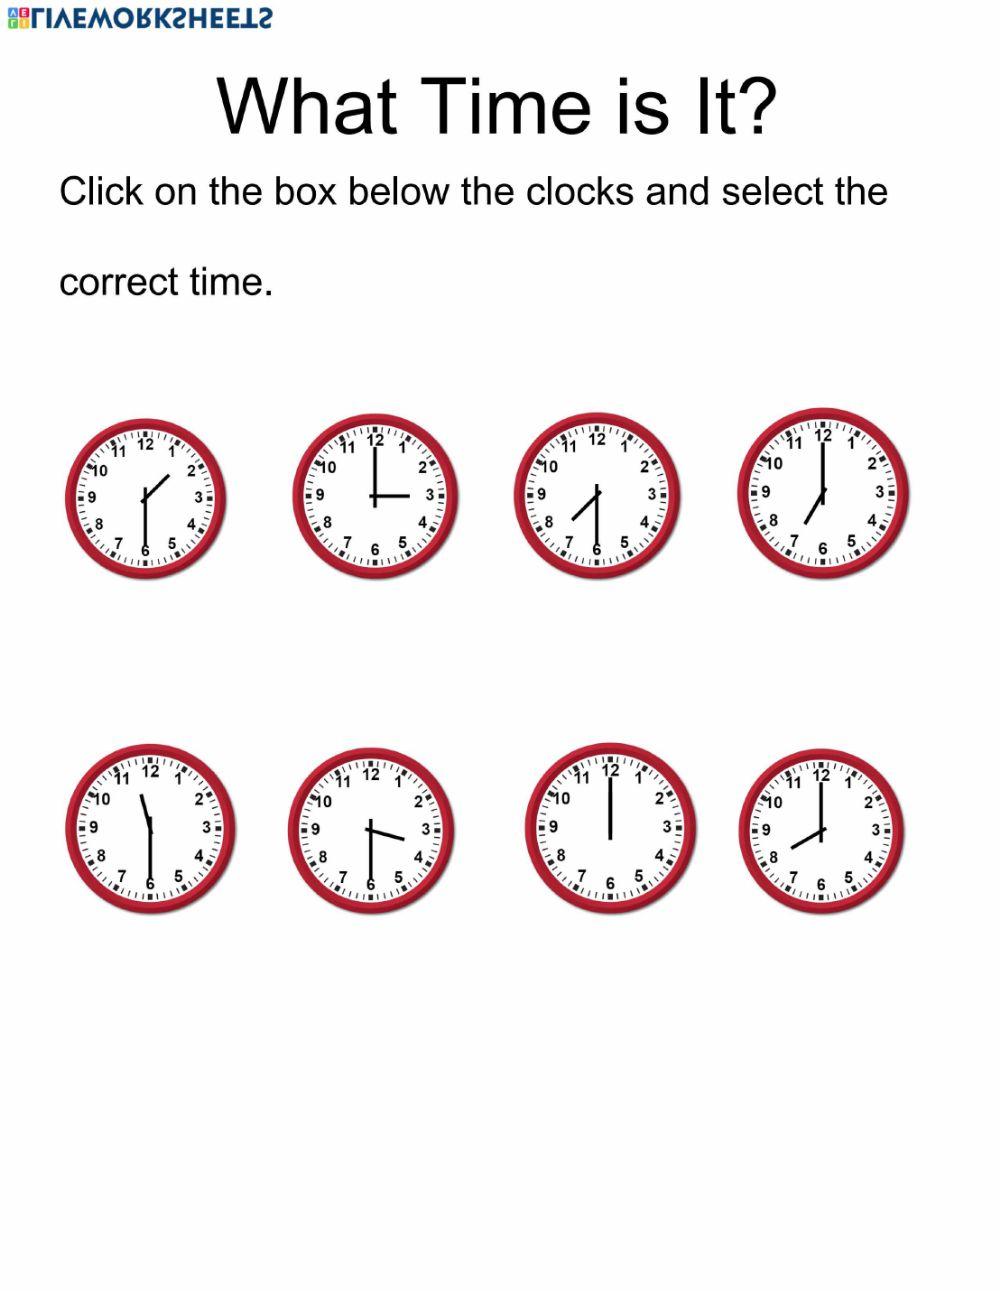 Choose the correct time